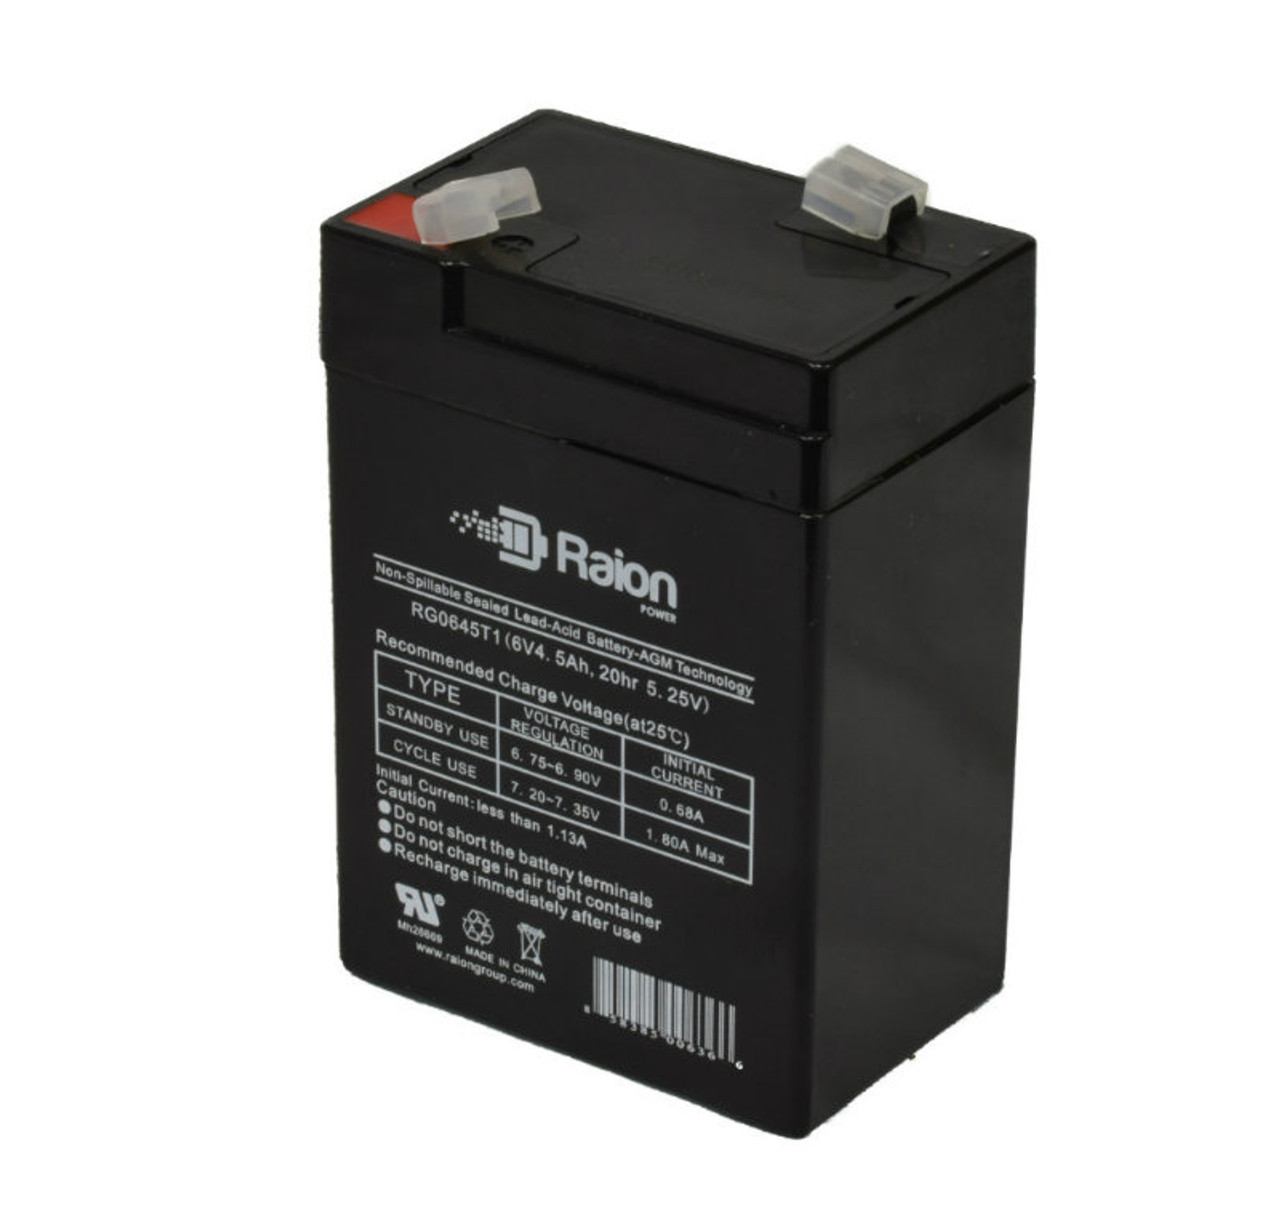 Raion Power RG0645T1 6V 4.5Ah Replacement Battery Cartridge for Light Alarms 2DM3